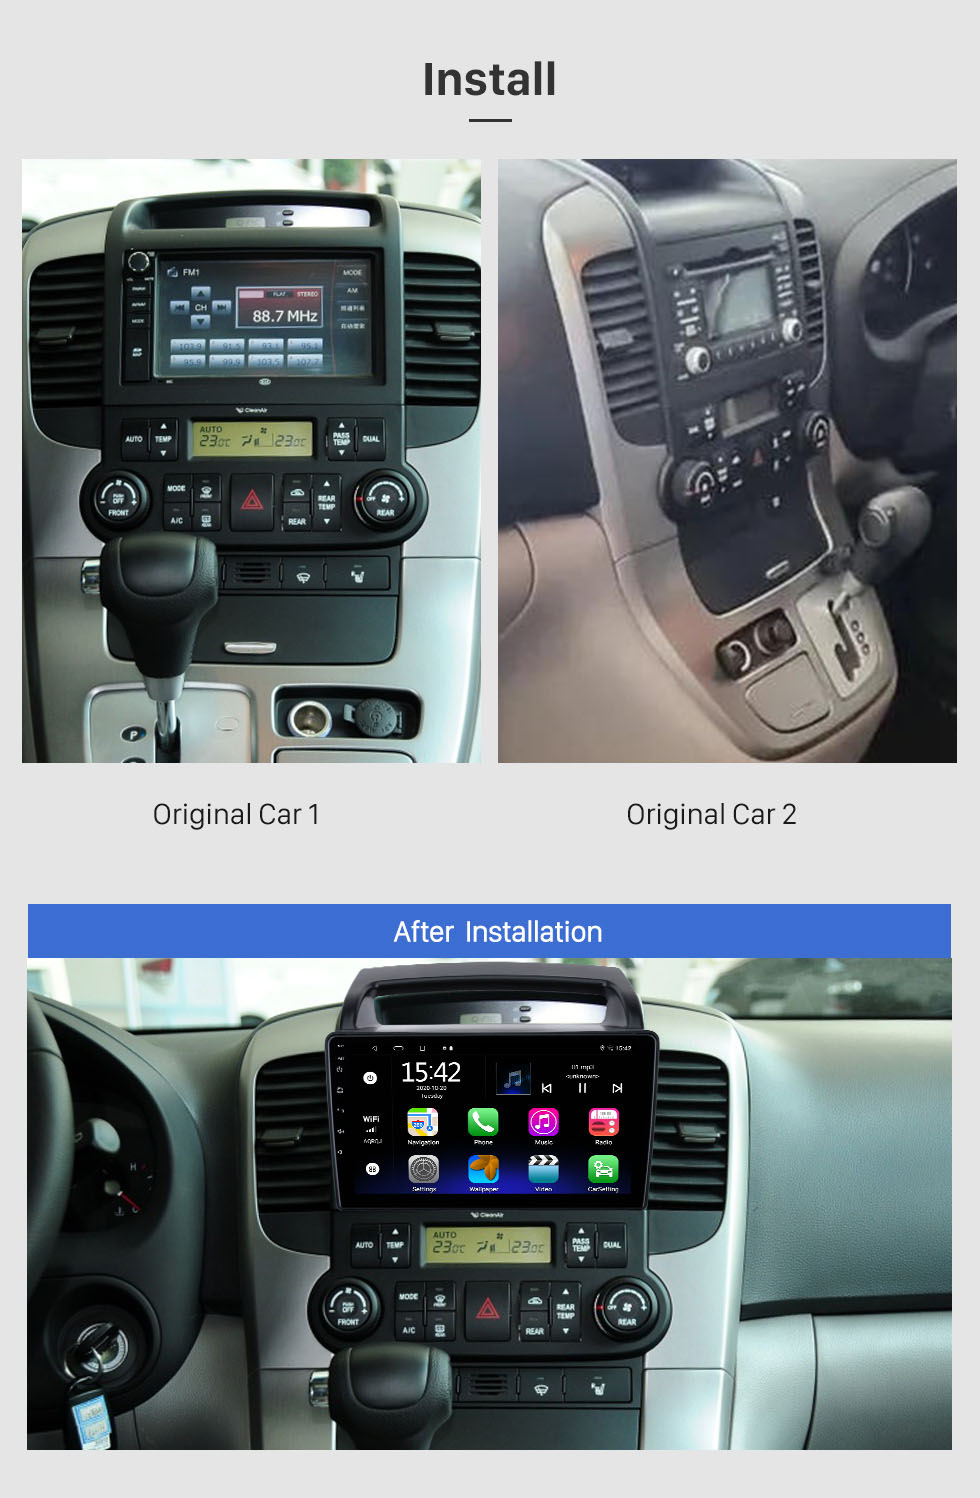 Bluetooth VQ Kia Android 13.0 Steering Wheel touchscreen Camera HD Digital GPS Link 2006-2014 System Mirror 9 Backup TV Radio Control Navigation Carnival TPMS inch with